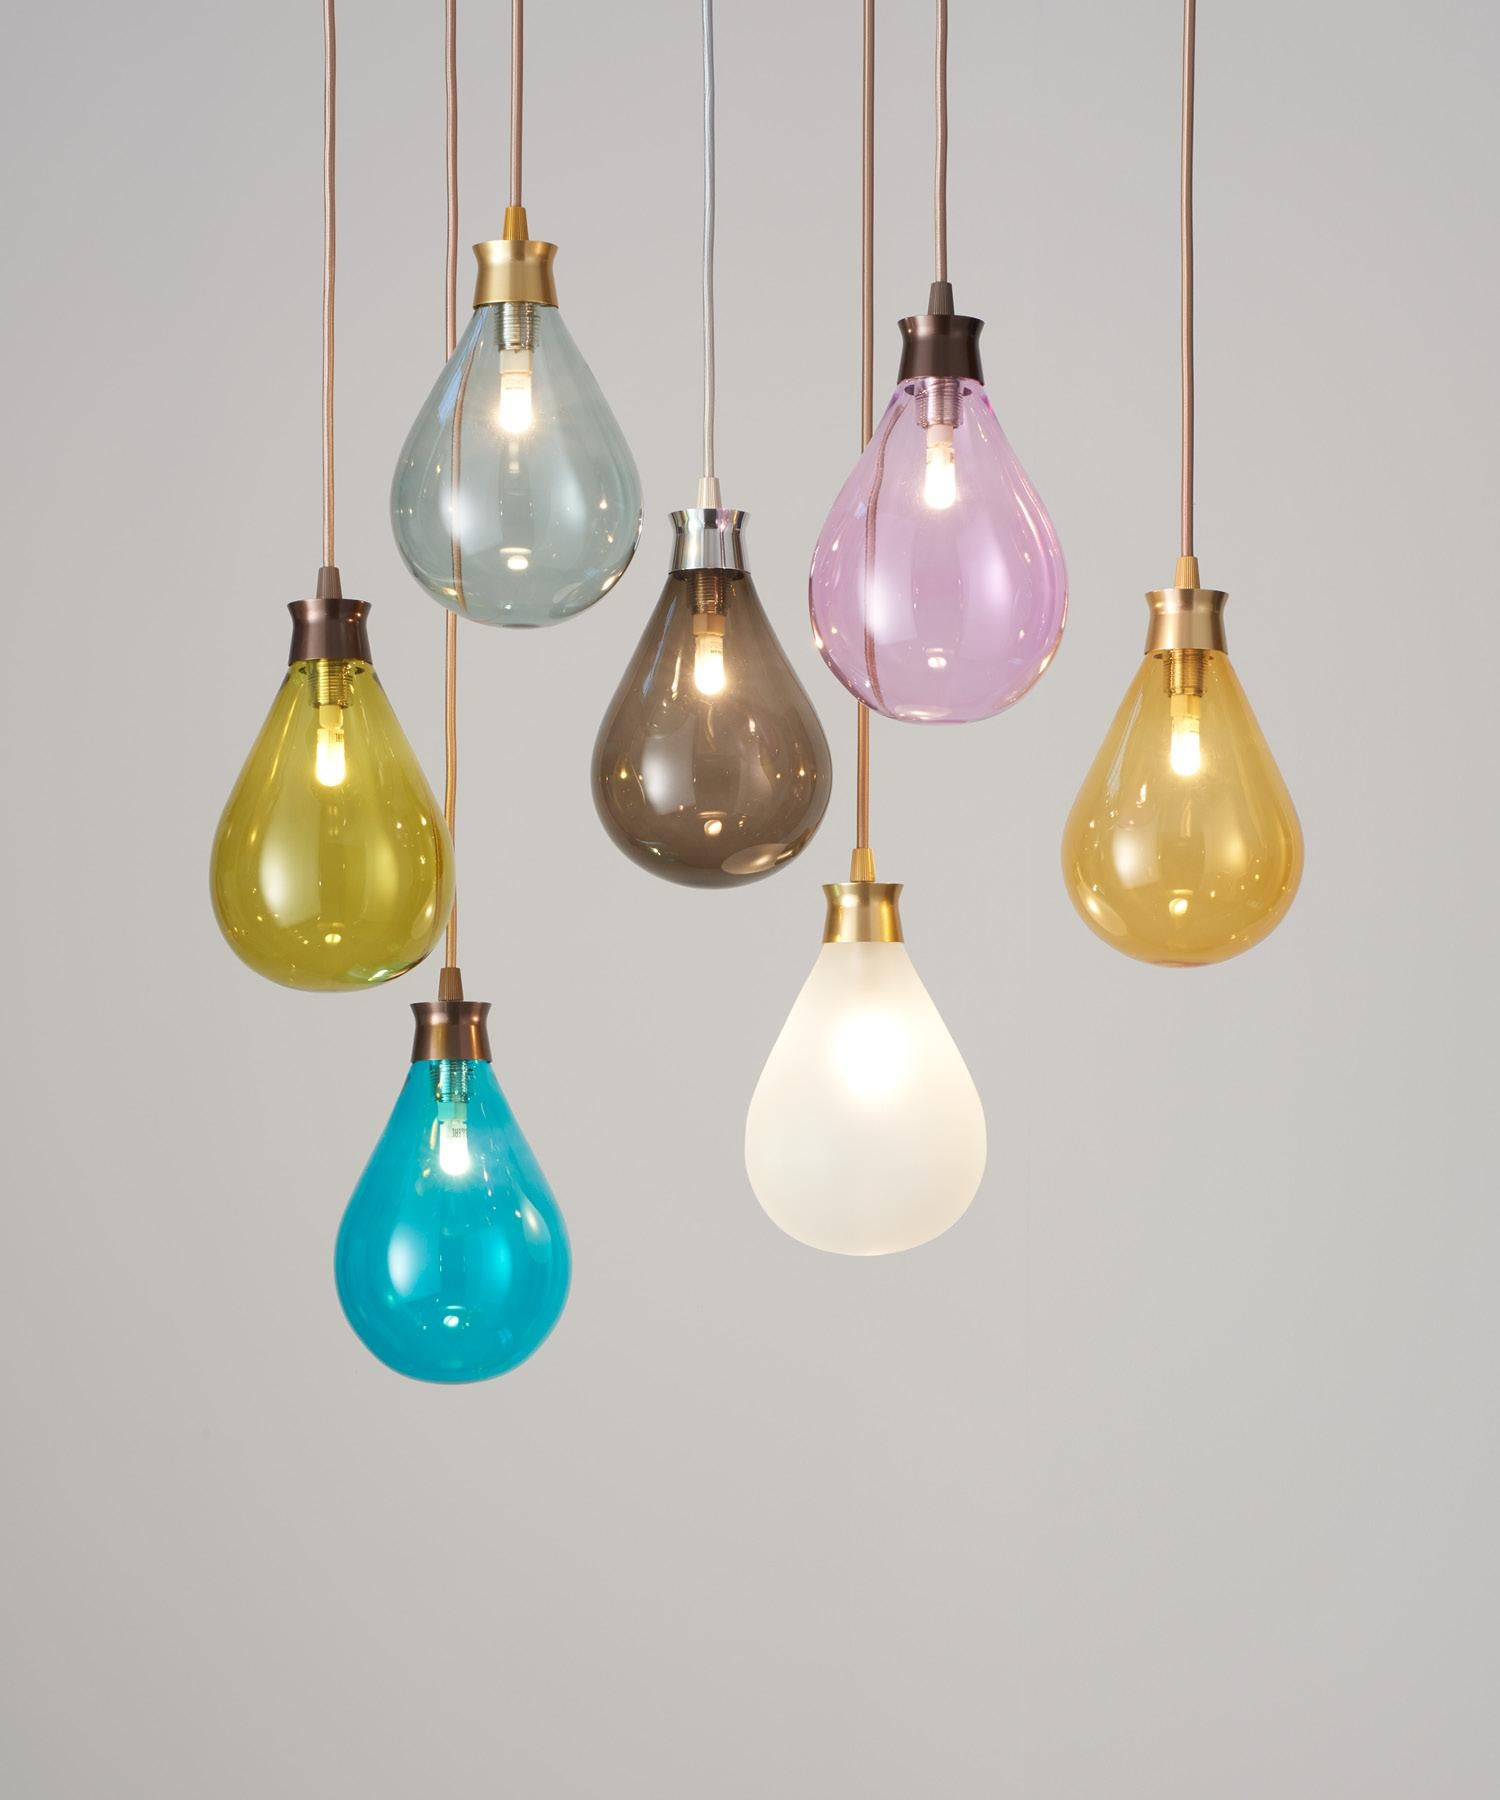 Cintola Pendant in Polished Aluminium with Bronze Handblown Glass Globe In New Condition For Sale In London, GB